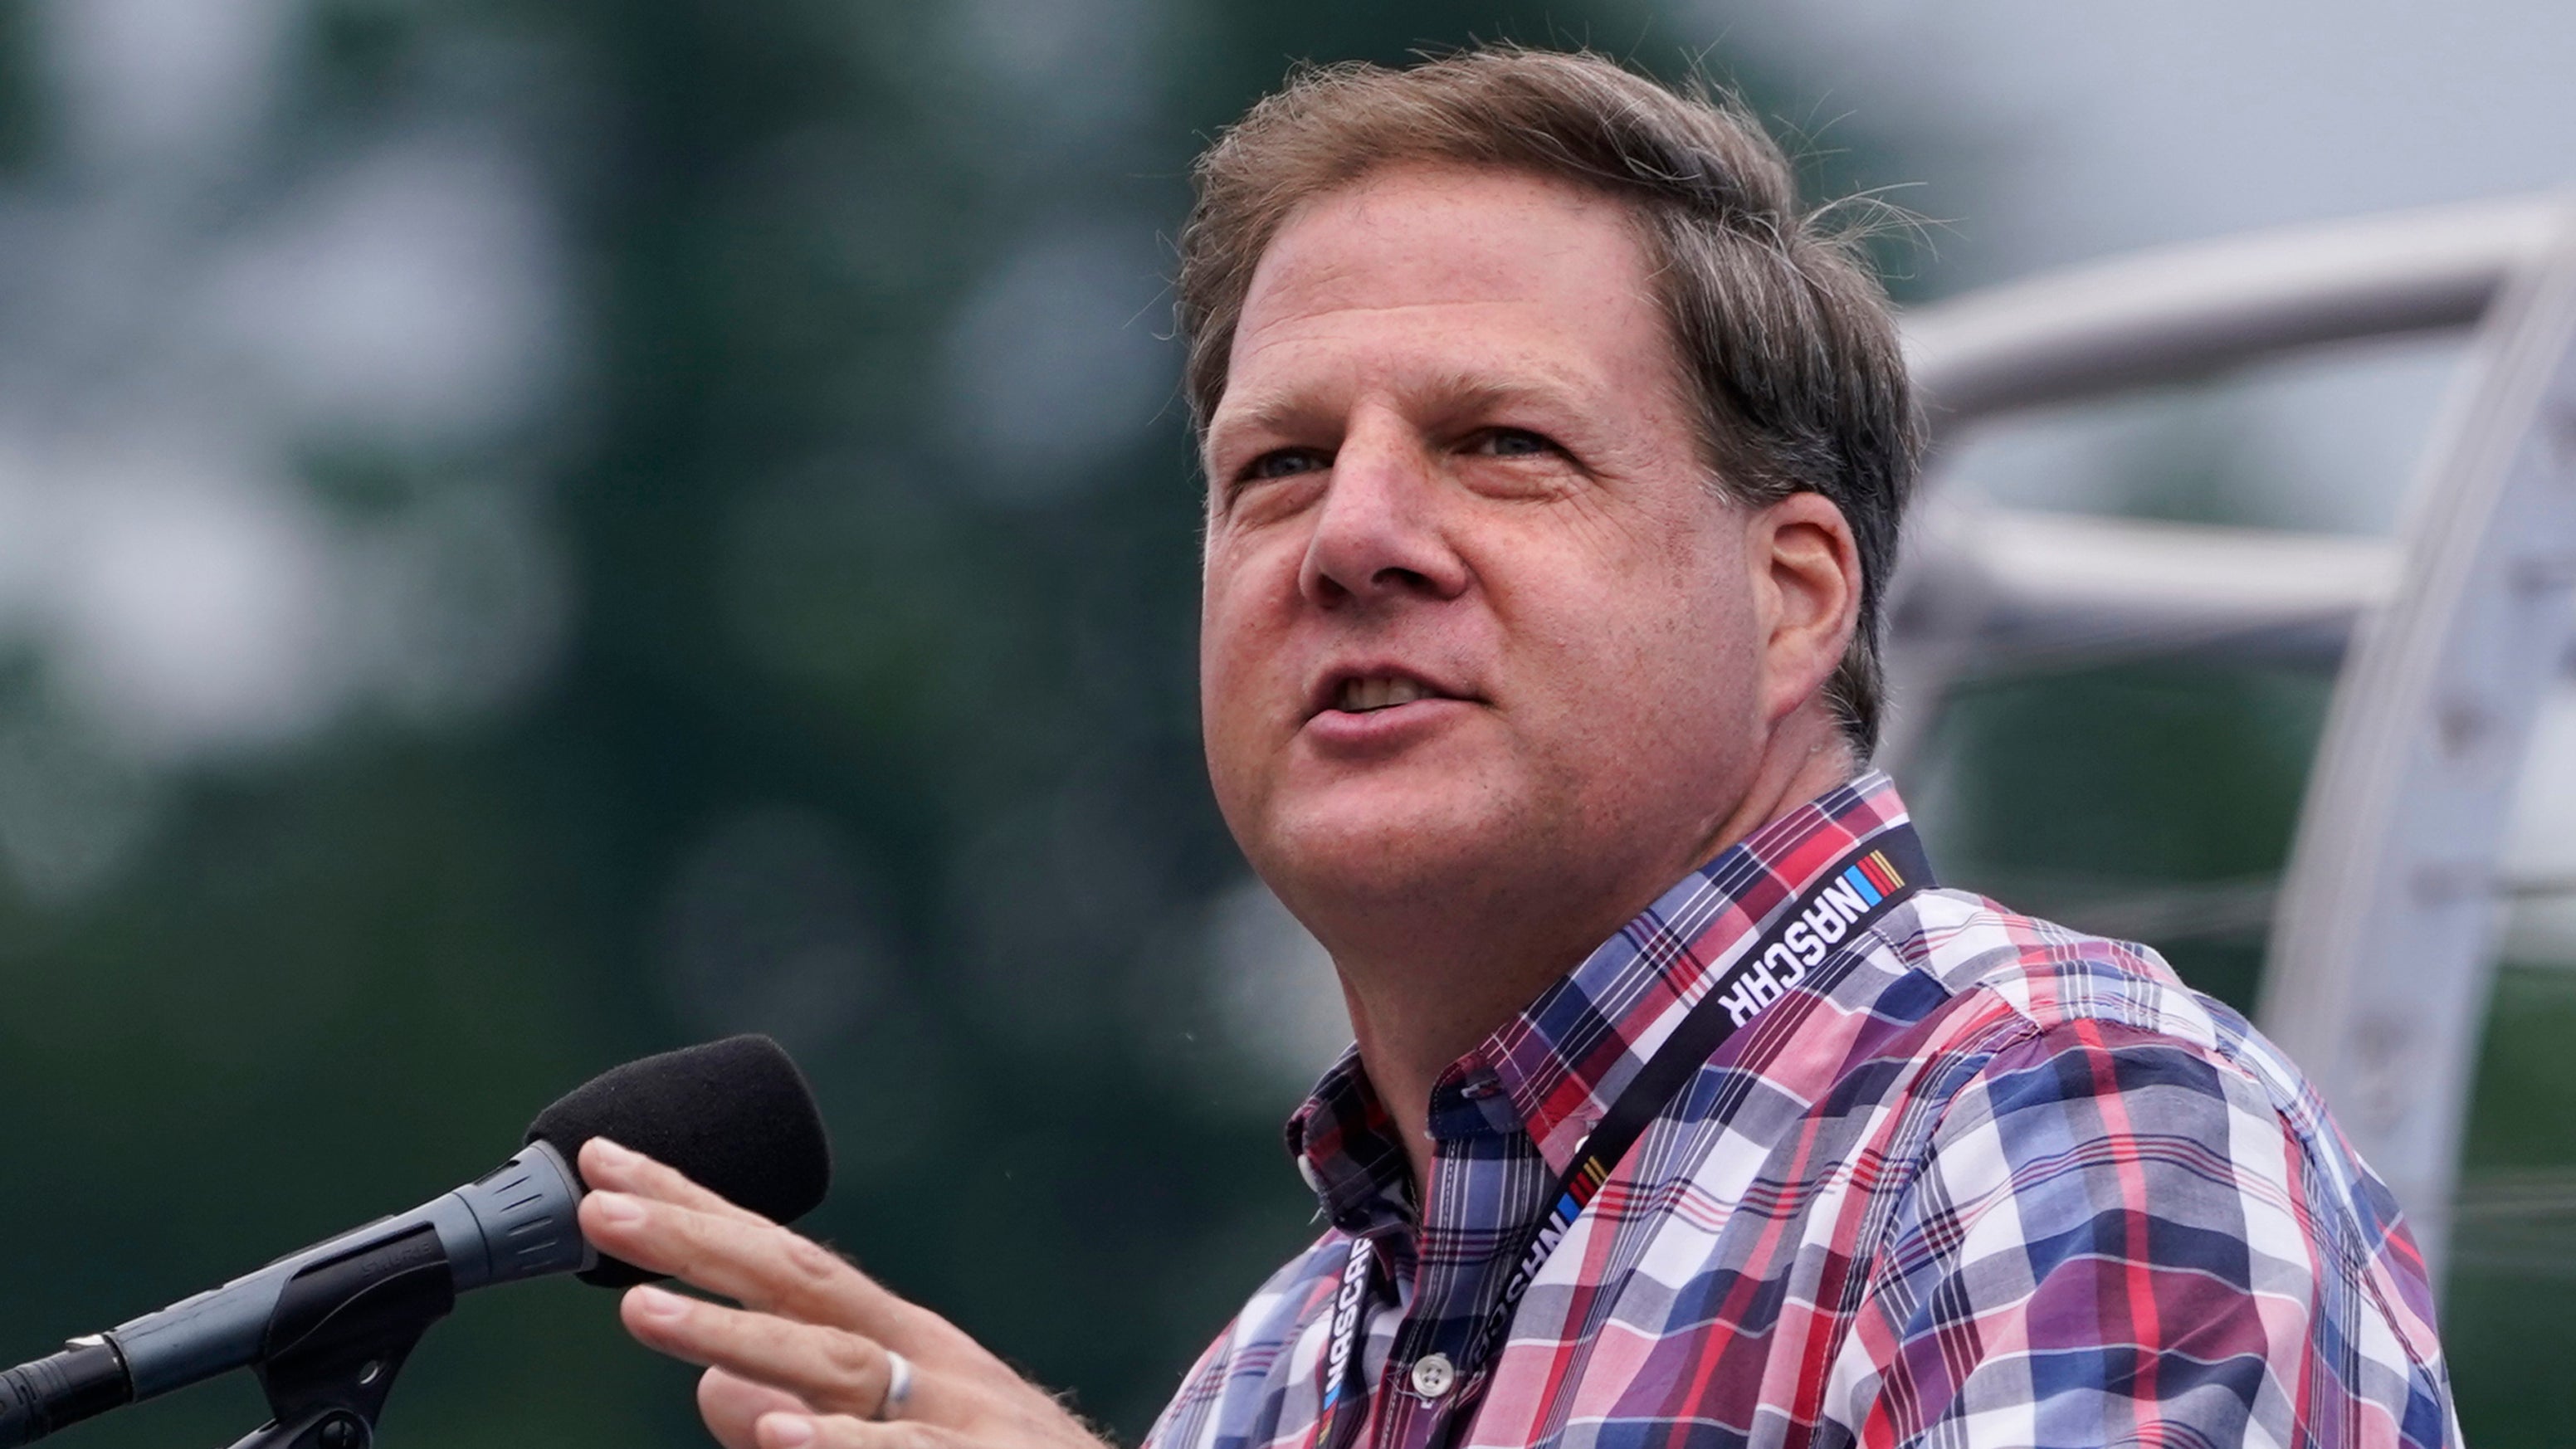 New Hampshire Governor Chris Sununu says ‘result would likely have been very different for Harmony’ if she wasn’t in care of father